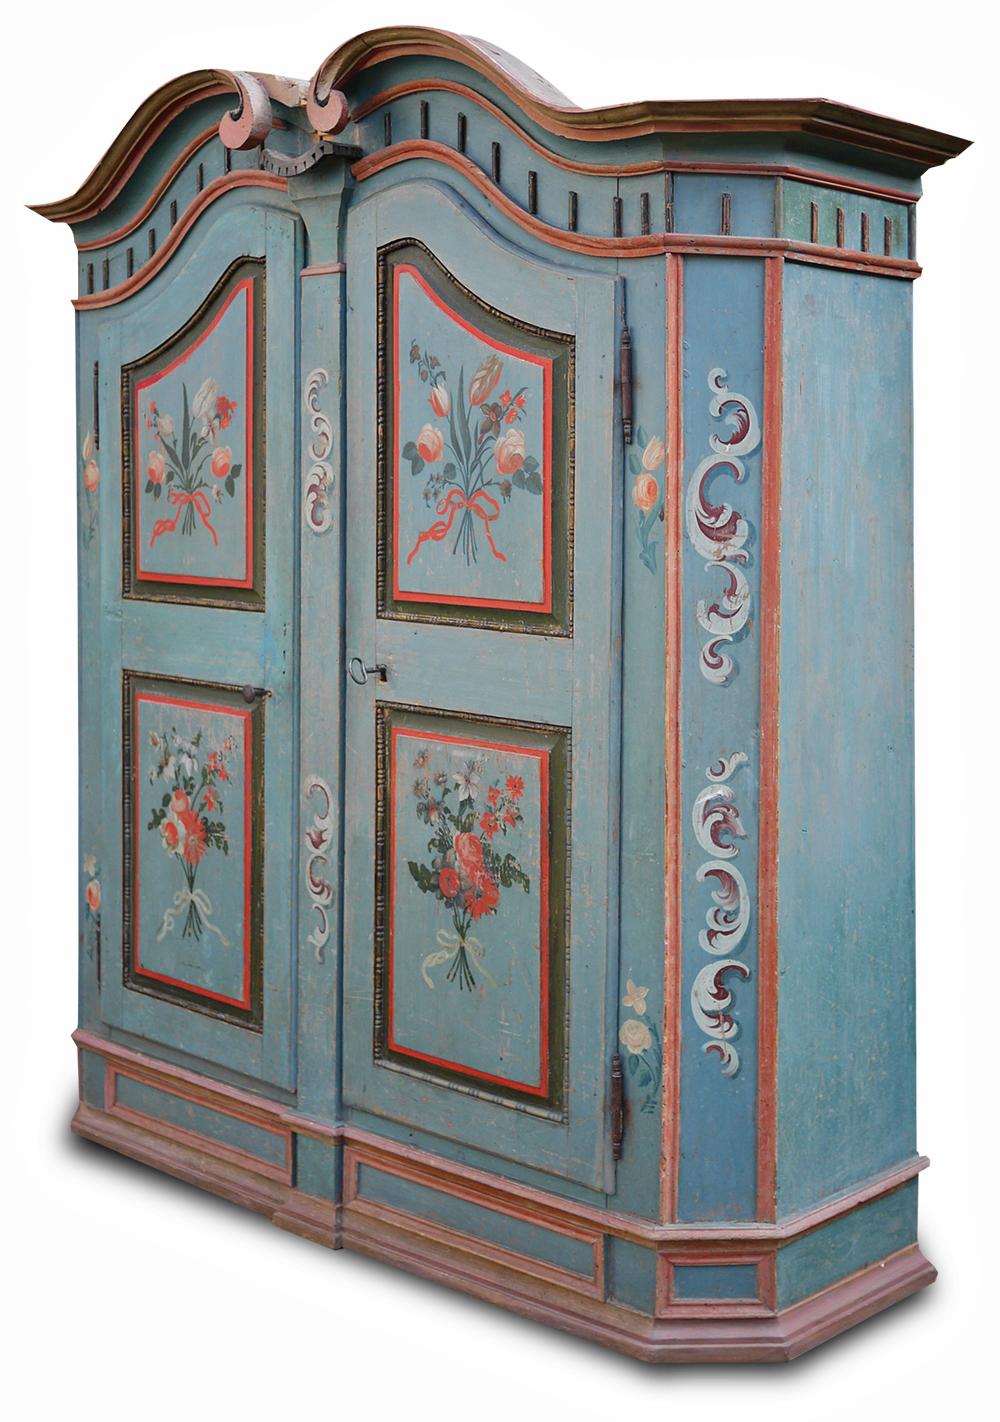 Tyrolean (Northern Italy) blue painted wardrobe

Measures: H 187 cm, L 170 cm, P 54 cm

Tyrolean painted wardrobe with two doors, entirely painted in light blue. Floral and Baroque motifs are distributed over the entire surface, especially on the